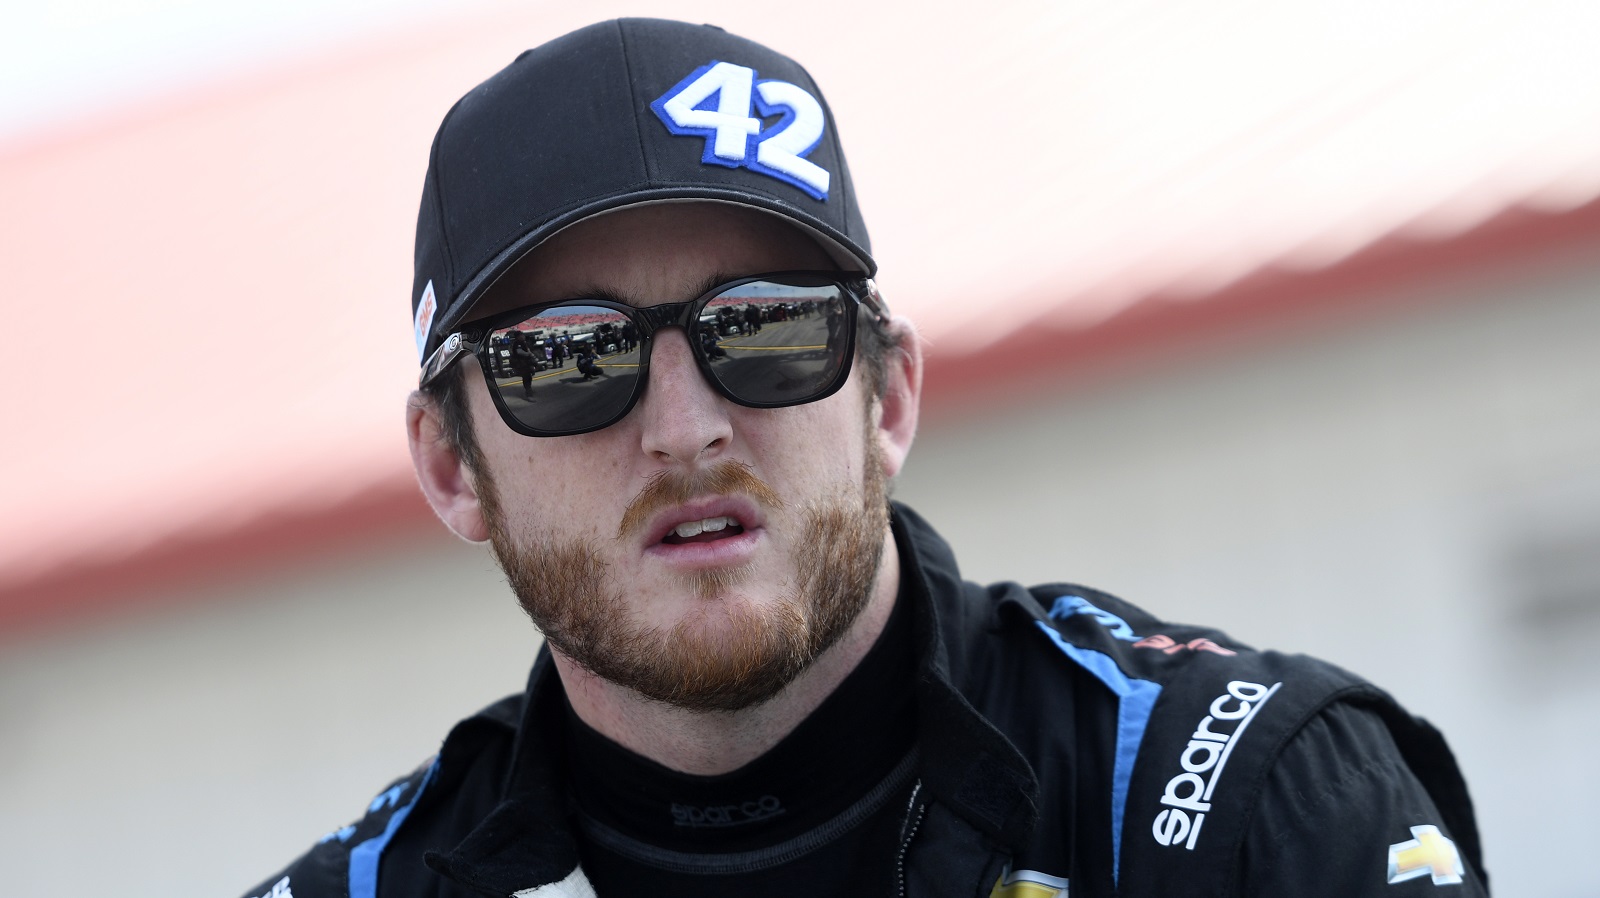 Ty Dillon looks on during qualifying for the NASCAR Cup Series Inaugural Enjoy Illinois 300 on June 4, 2022, at World Wide Technology Raceway.